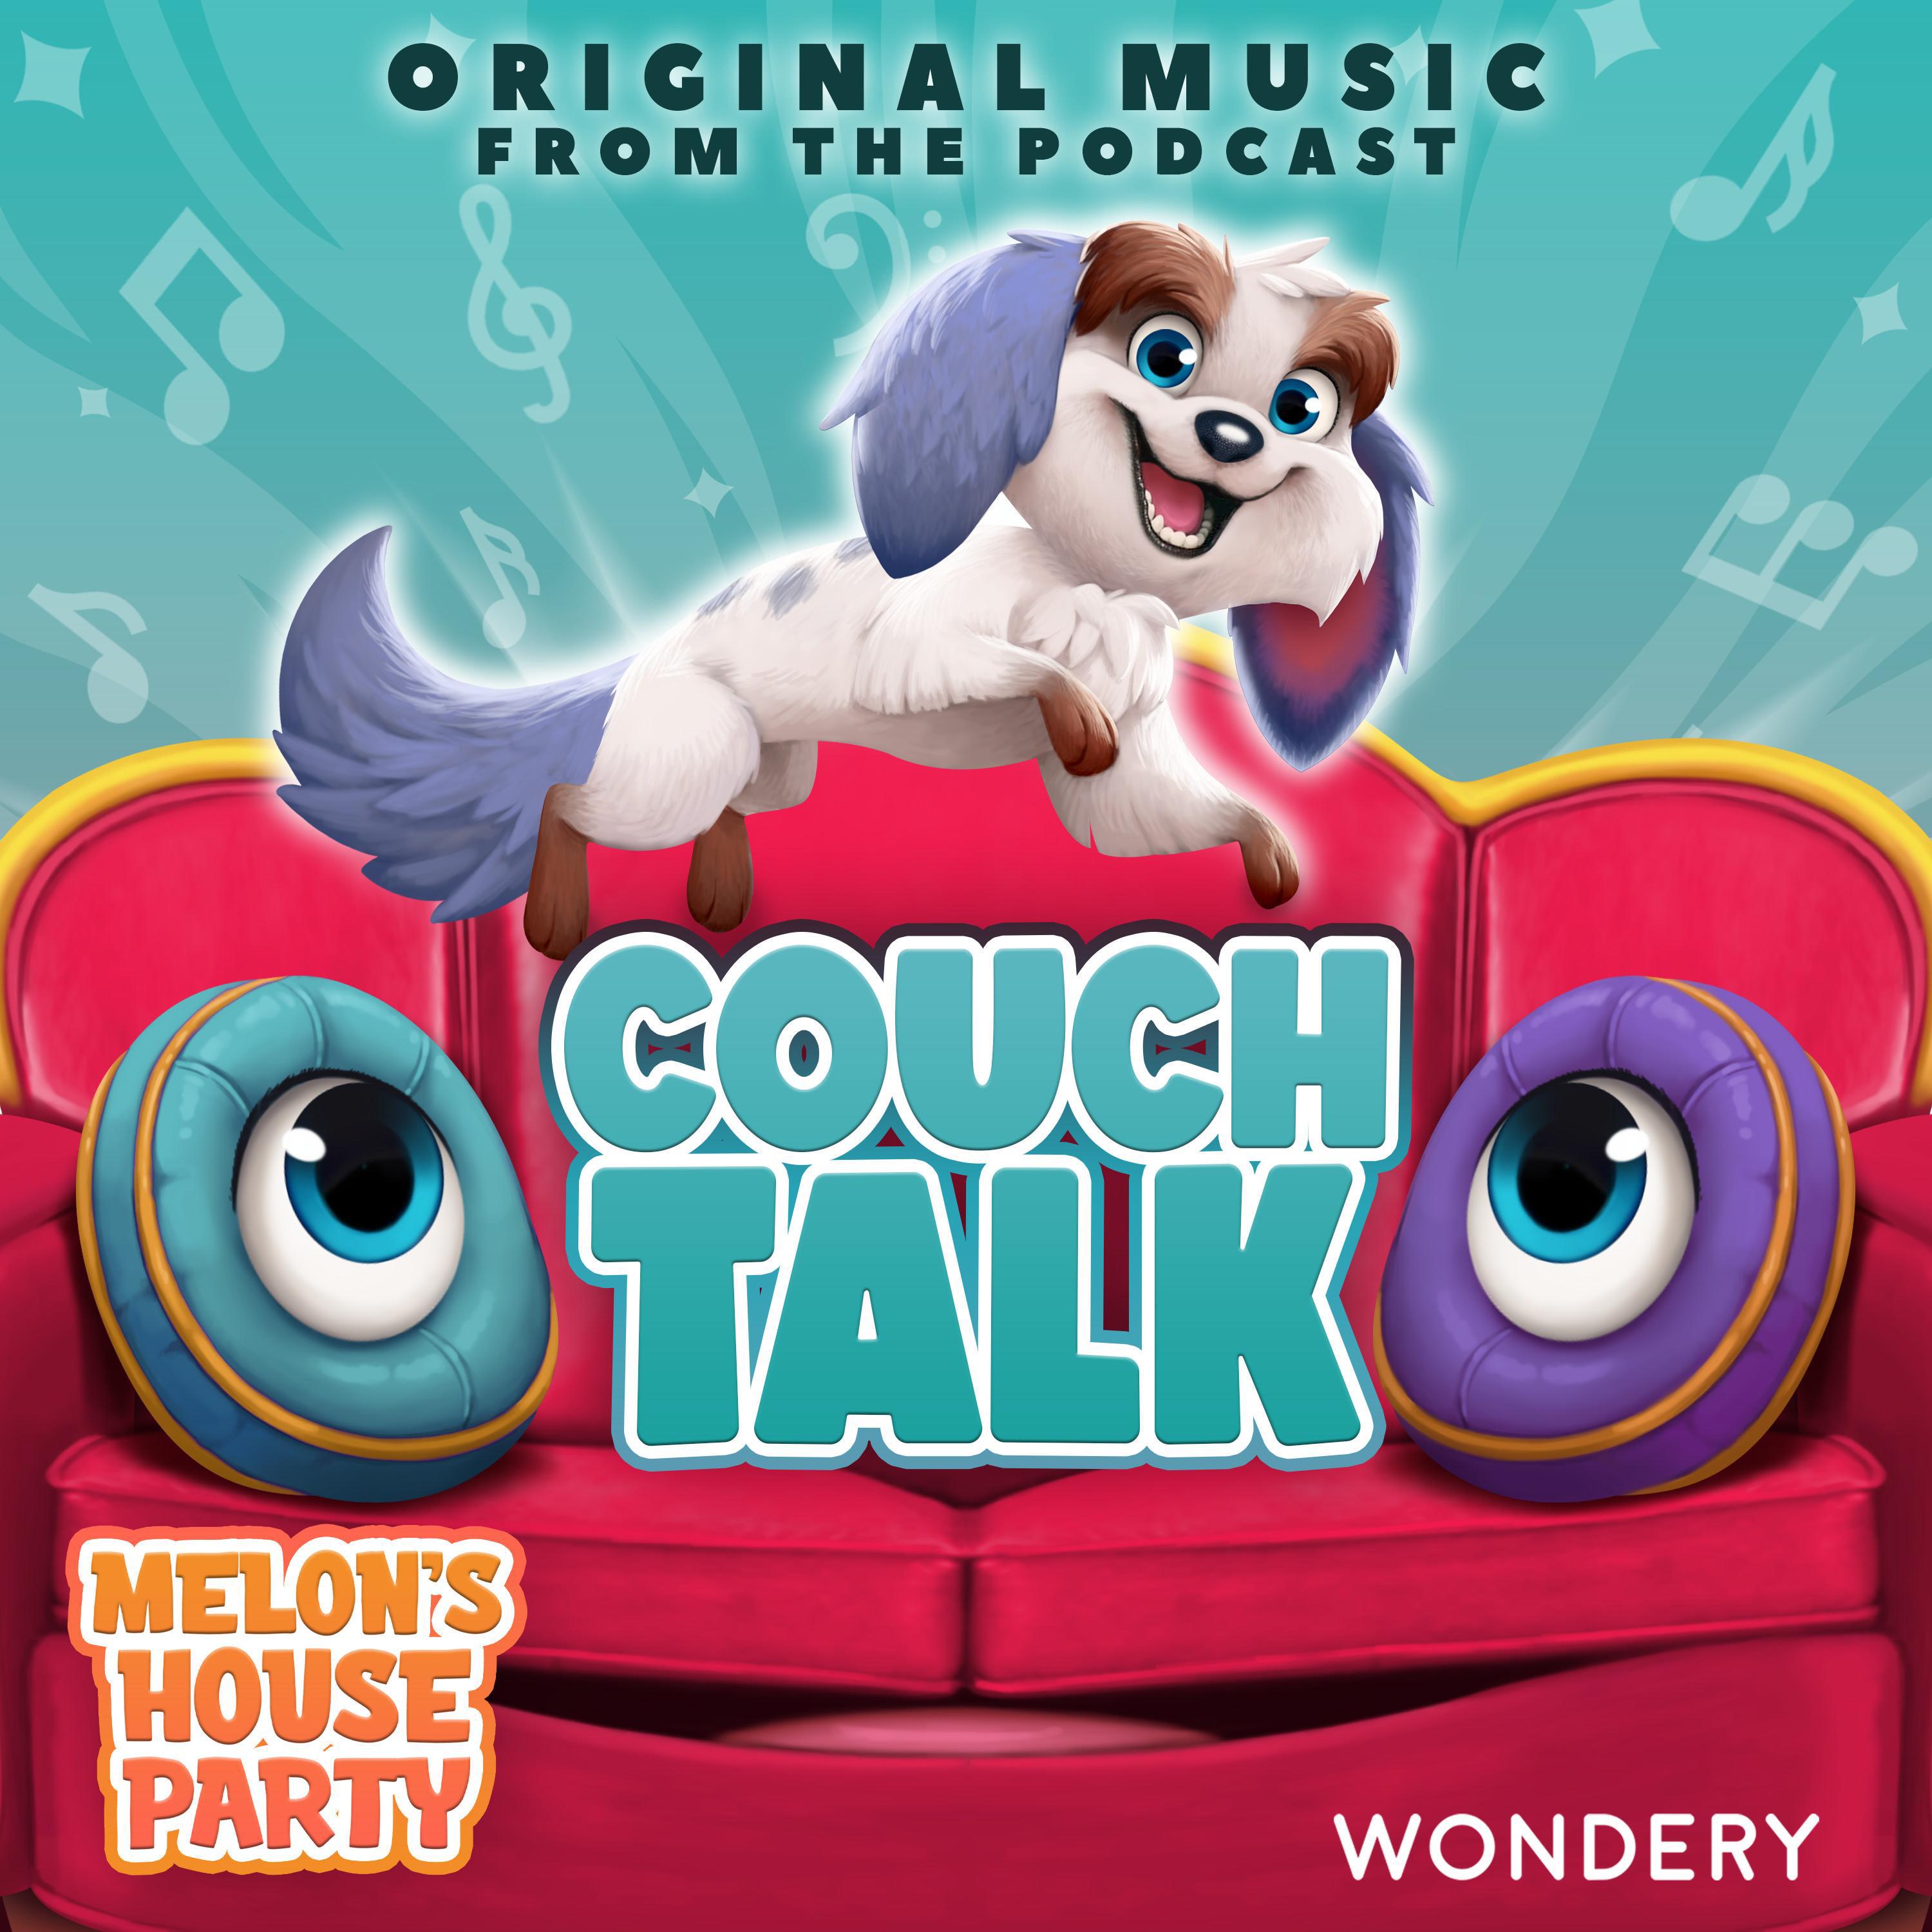 Melon's House Party - Couch Talk (feat. Sugar Joans)